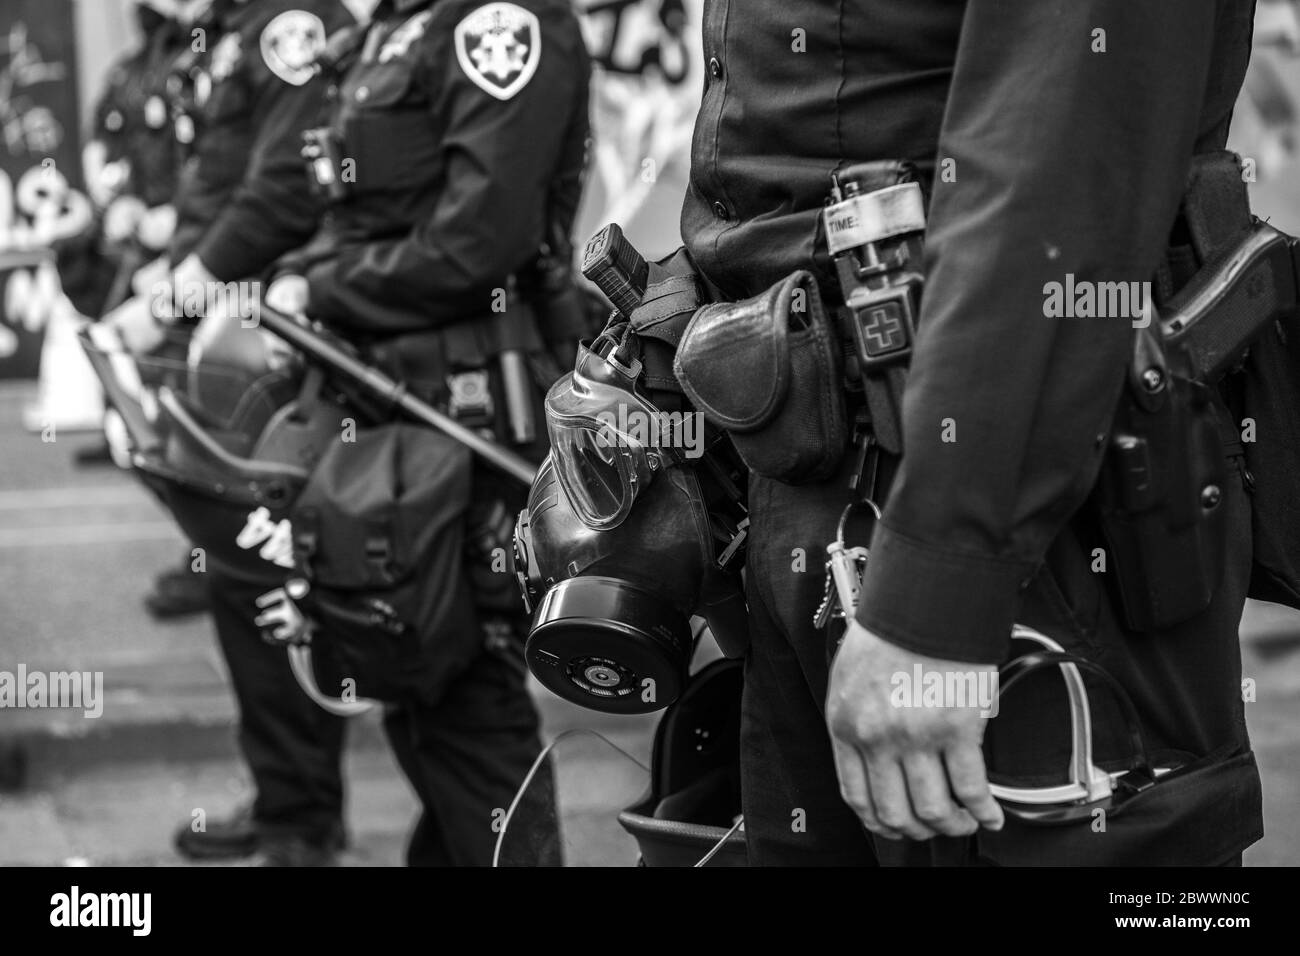 Oakland, Ca. 2nd June, 2020. A closeup of Oakland Police gear at the Oakland Police Department in Oakland, California on June 2, 2020 after the death of George Floyd. Credit: Chris Tuite/Image Space/Media Punch/Alamy Live News Stock Photo